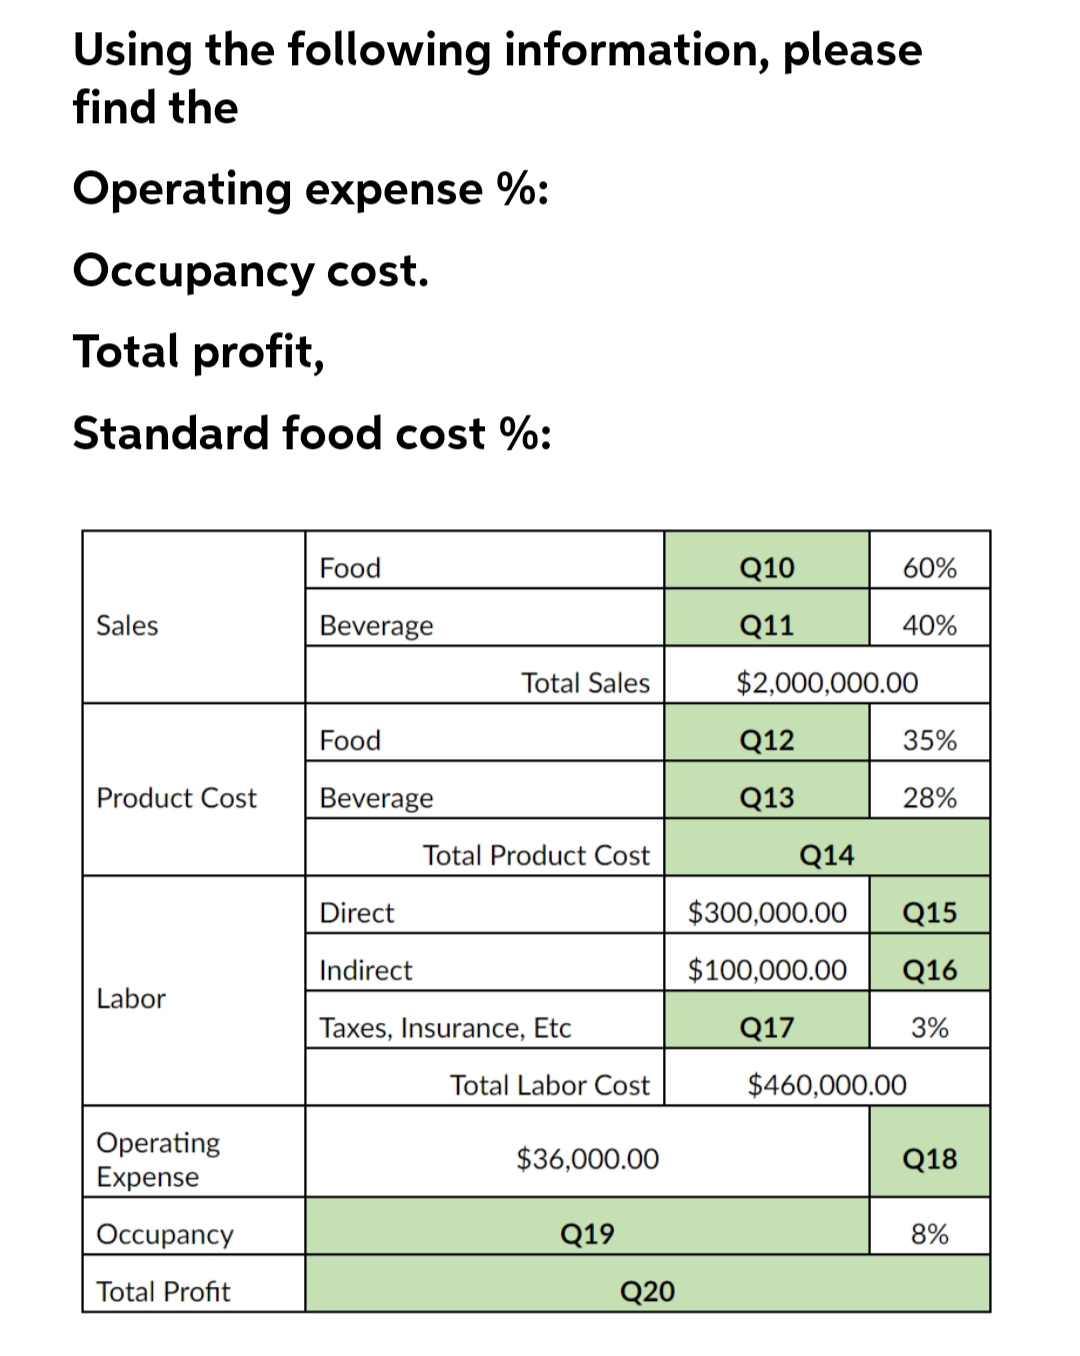 Using the following information, please
find the
Operating expense %:
Occupancy cost.
Total profit,
Standard food cost %:
Sales
Product Cost
Labor
Operating
Expense
Occupancy
Total Profit
Food
Beverage
Food
Beverage
Total Sales
Total Product Cost
Direct
Indirect
Taxes, Insurance, Etc
Total Labor Cost
$36,000.00
Q19
Q20
Q10
Q11
$2,000,000.00
Q12
Q13
60%
40%
Q14
35%
28%
$300,000.00
Q15
$100,000.00 Q16
Q17
3%
$460,000.00
Q18
8%